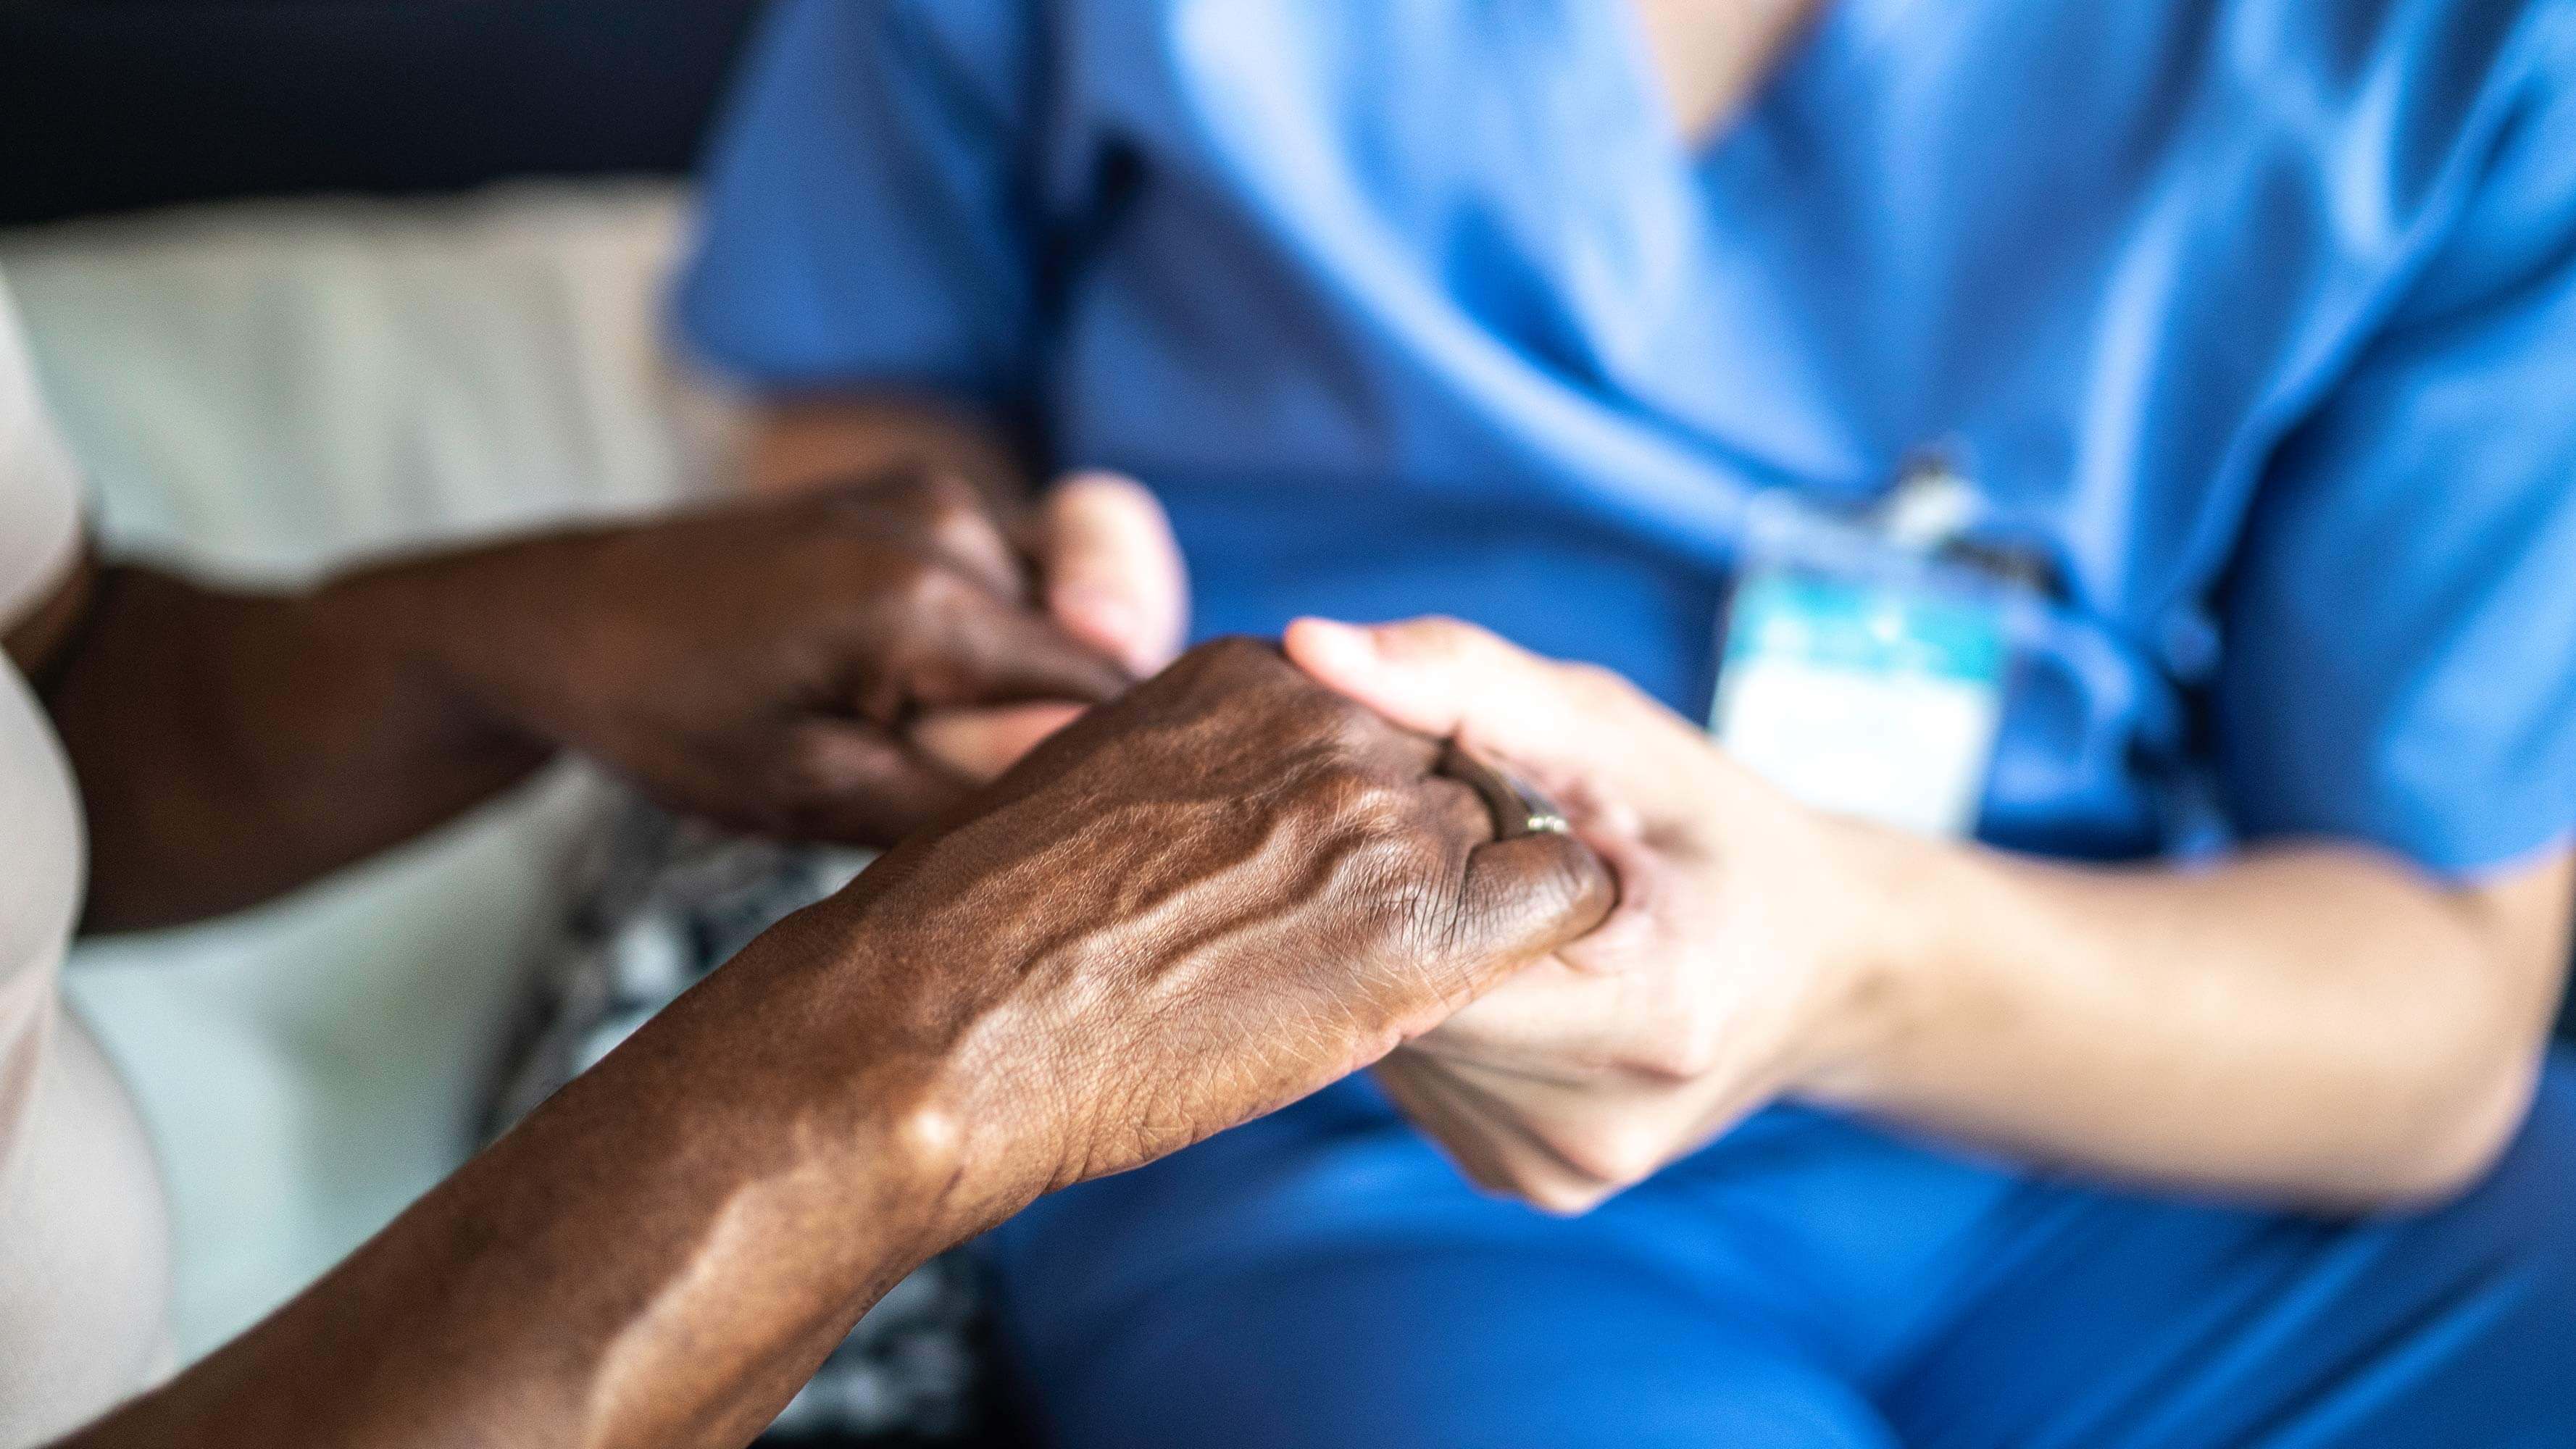 A close-up photo of a nurse, wearing bright blue scrubs, holding the hand of patient.